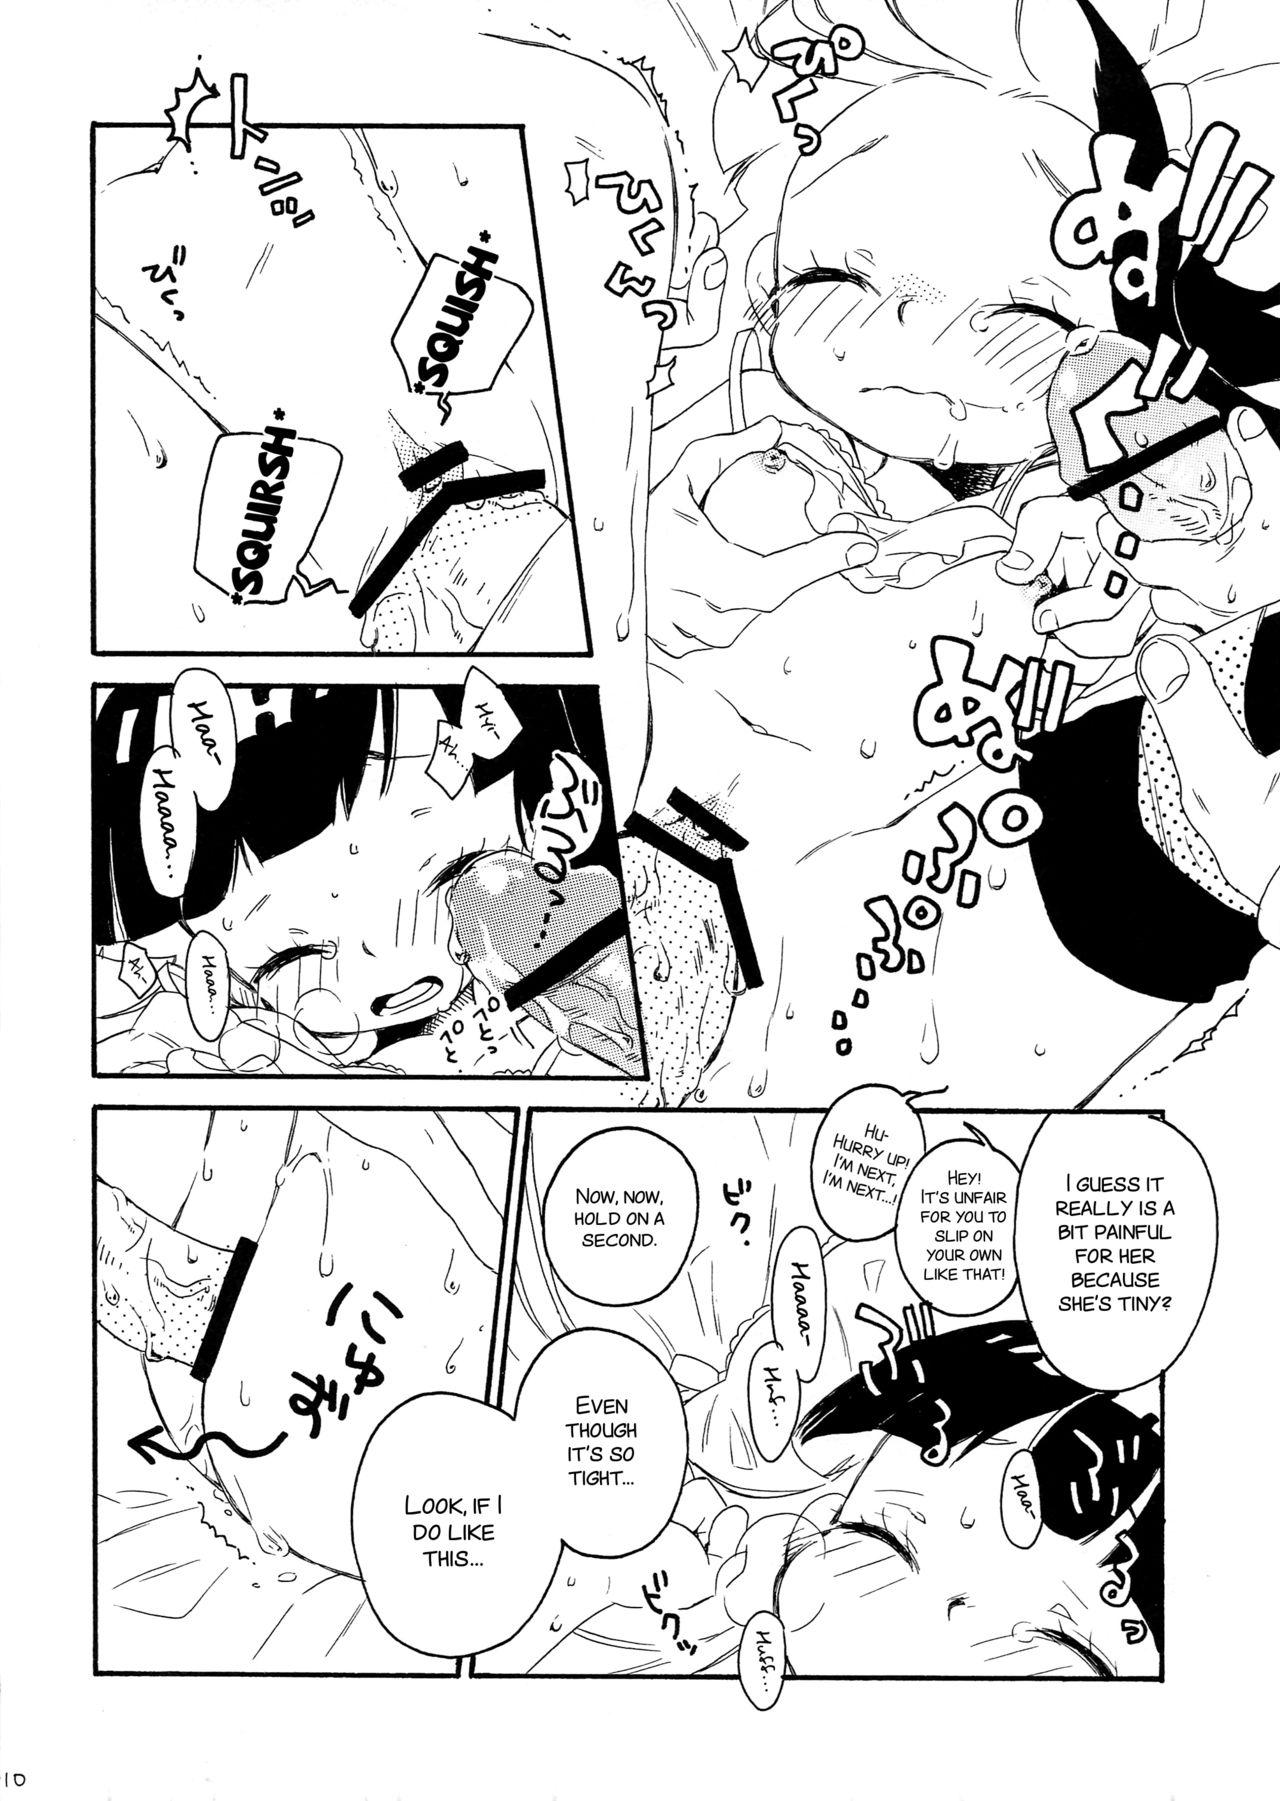 First Stop Daydreaming! - Panty and stocking with garterbelt Super Hot Porn - Page 10